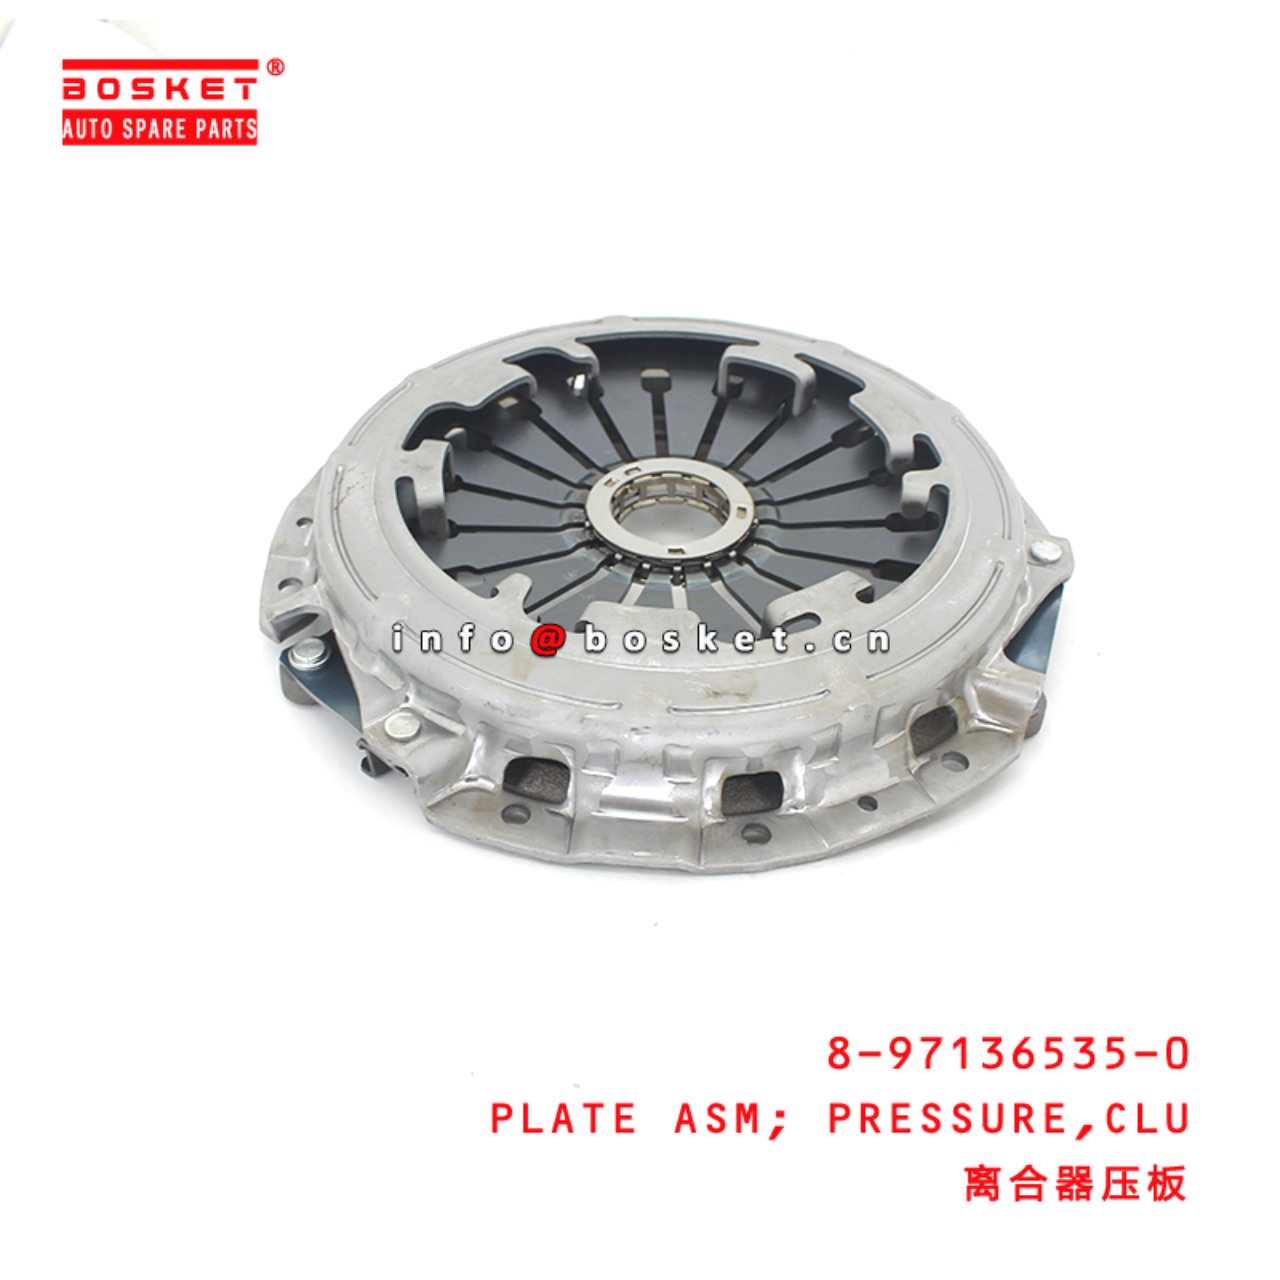 8-97136535-0 Clutch Pressure Plate Assembly suitable for ISUZU 6VE1 8971365350